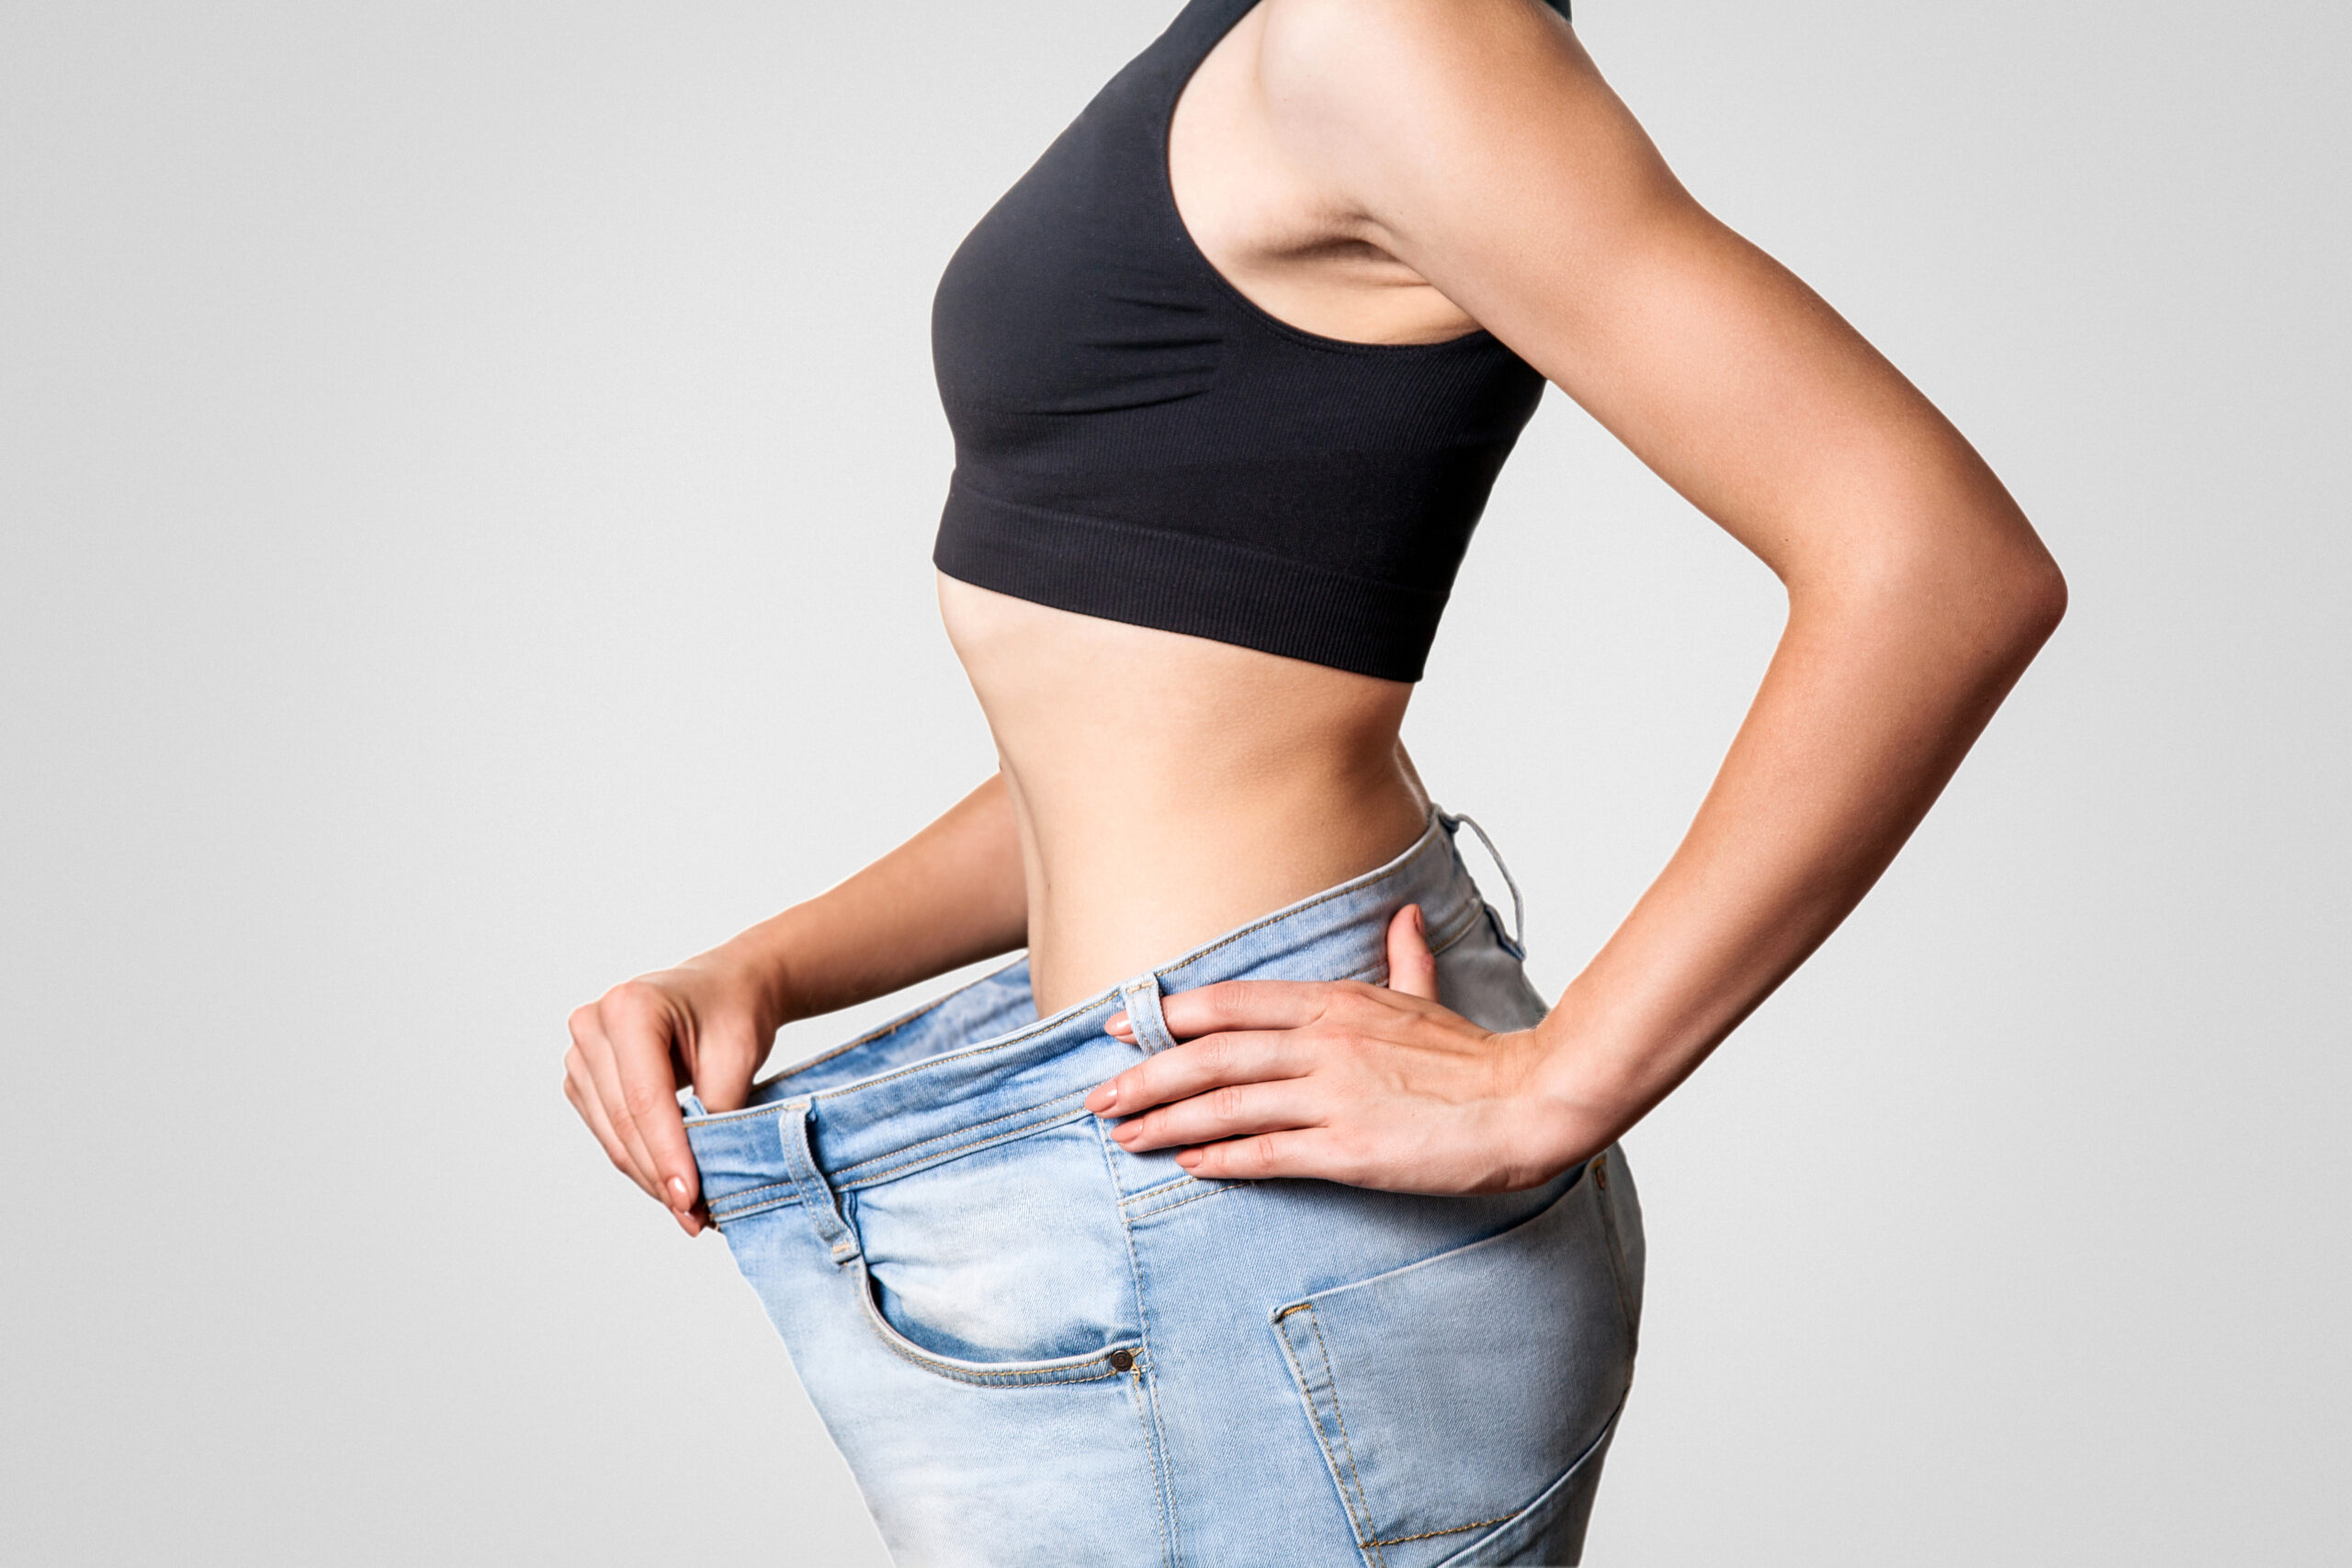 How to get rid of back fat rolls and loose skin on your stomach